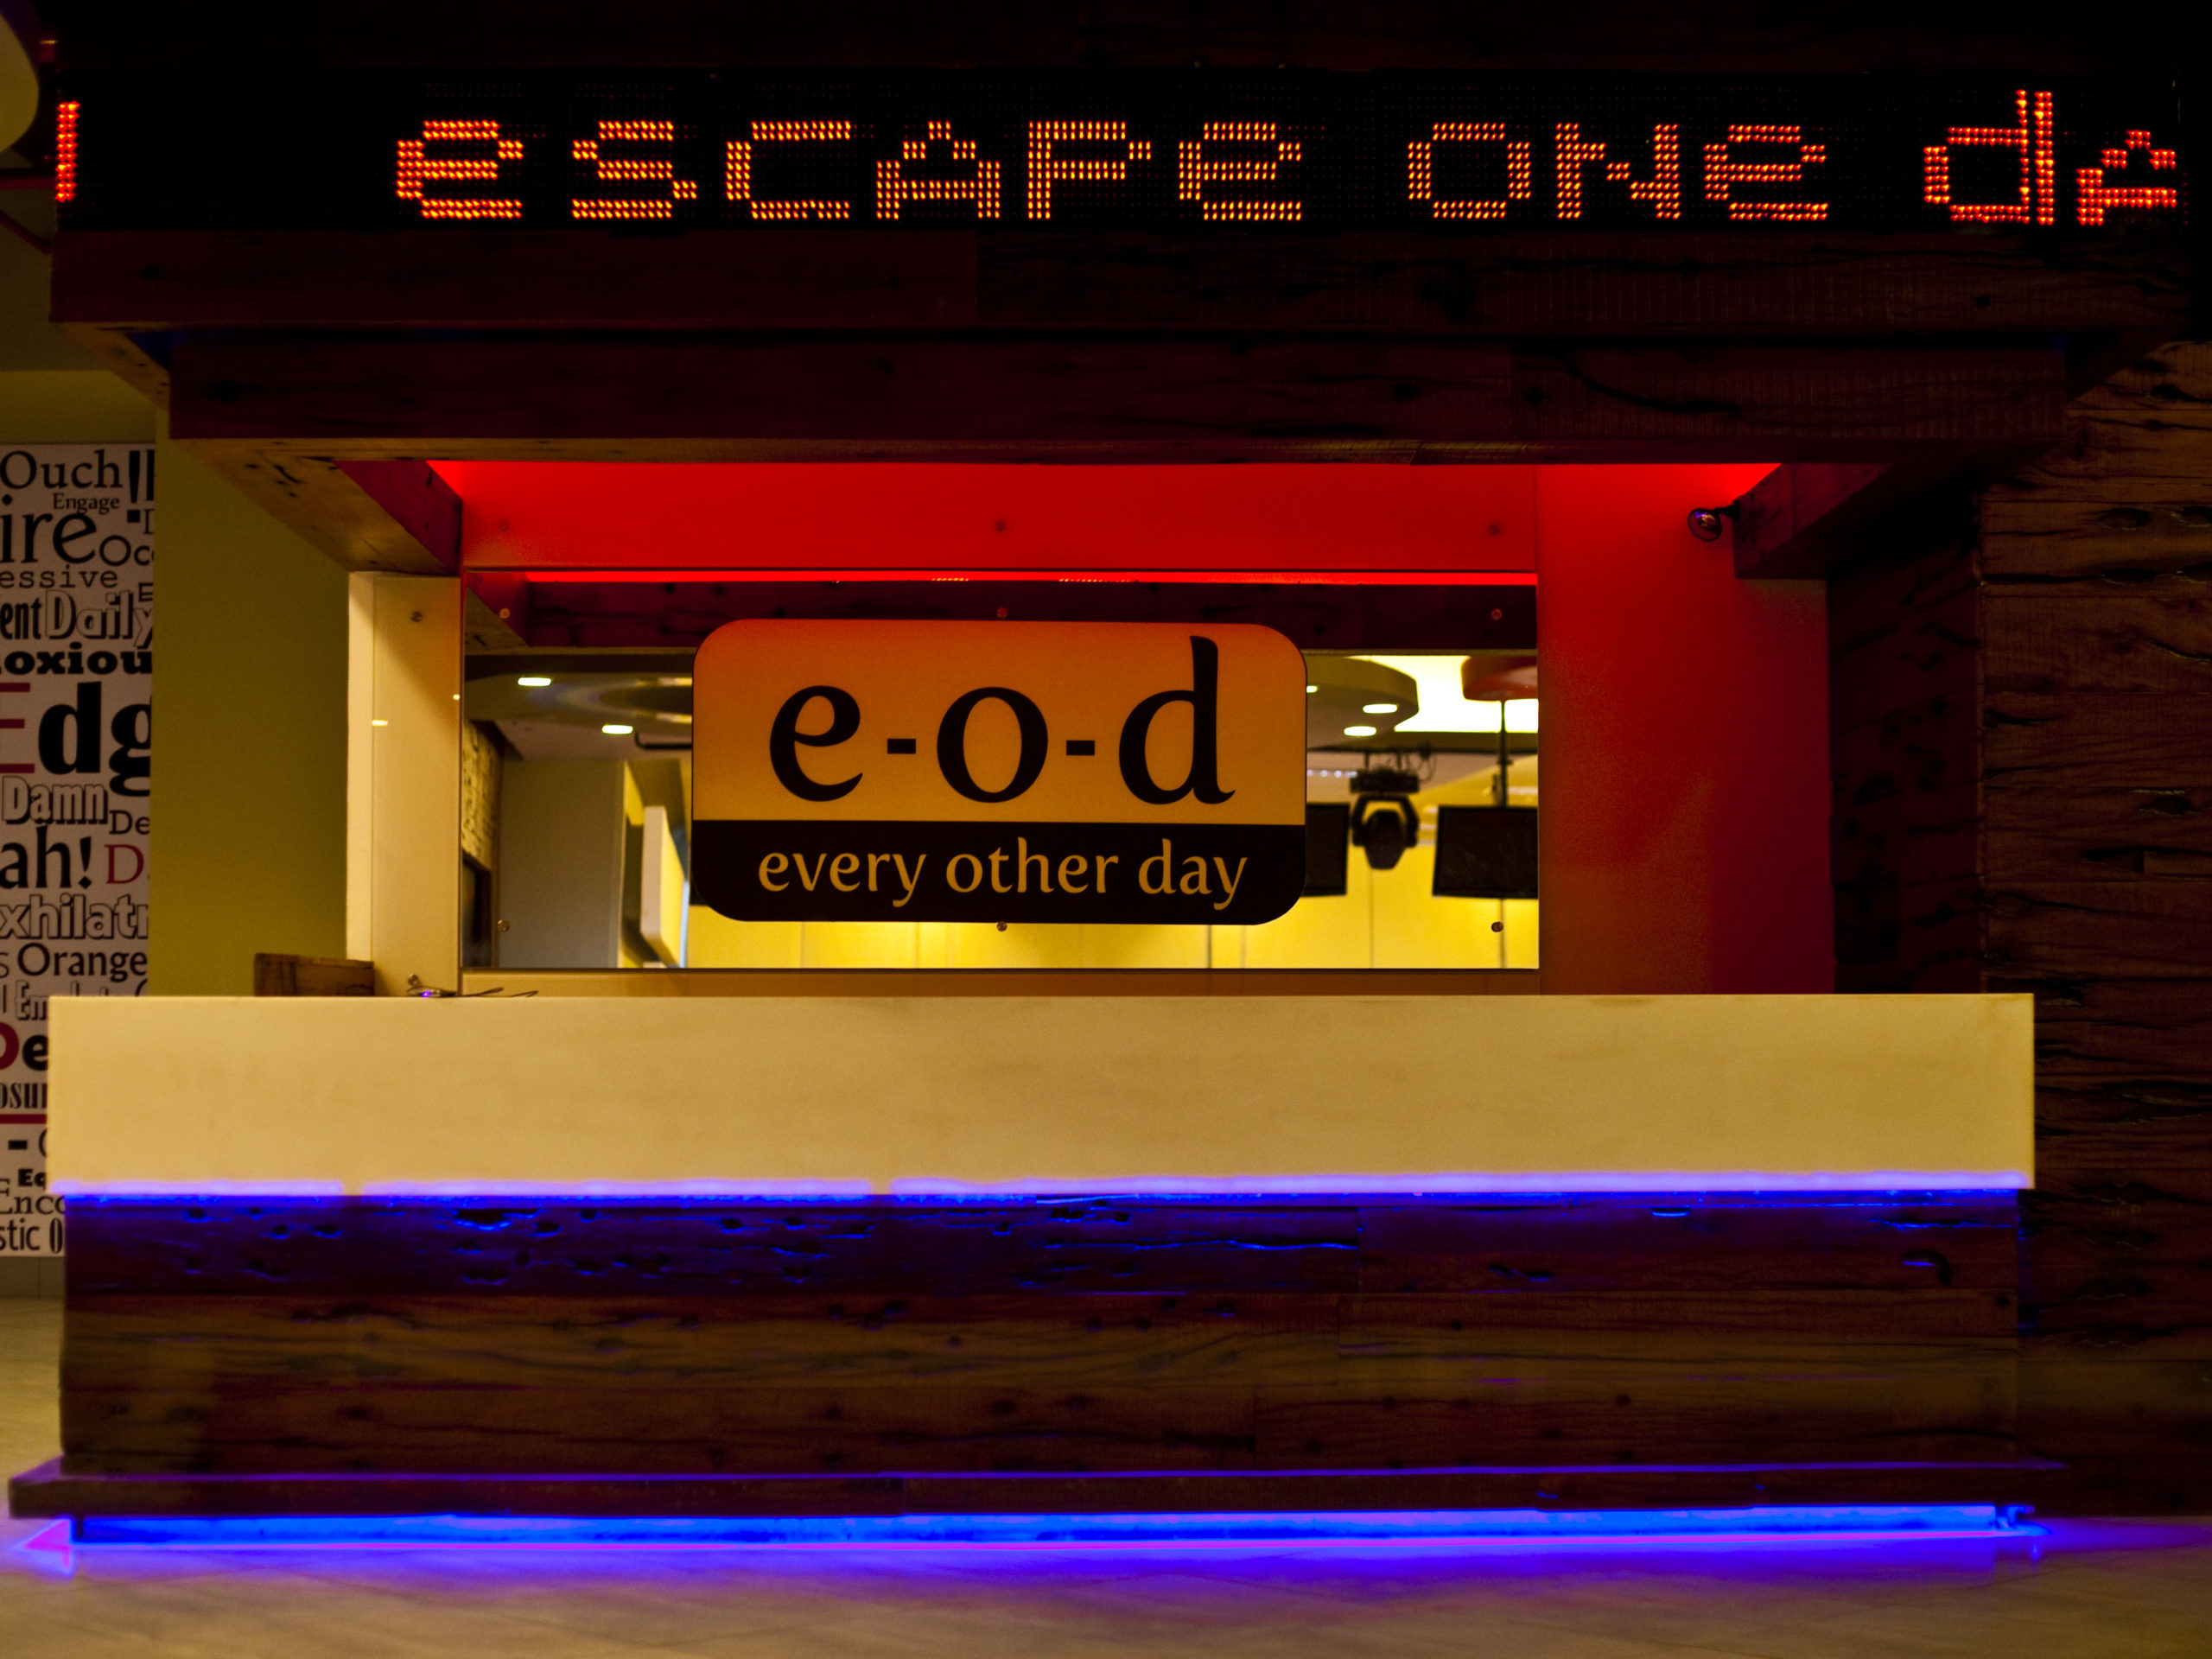 EOD (Every Other Day)-Noida, UP